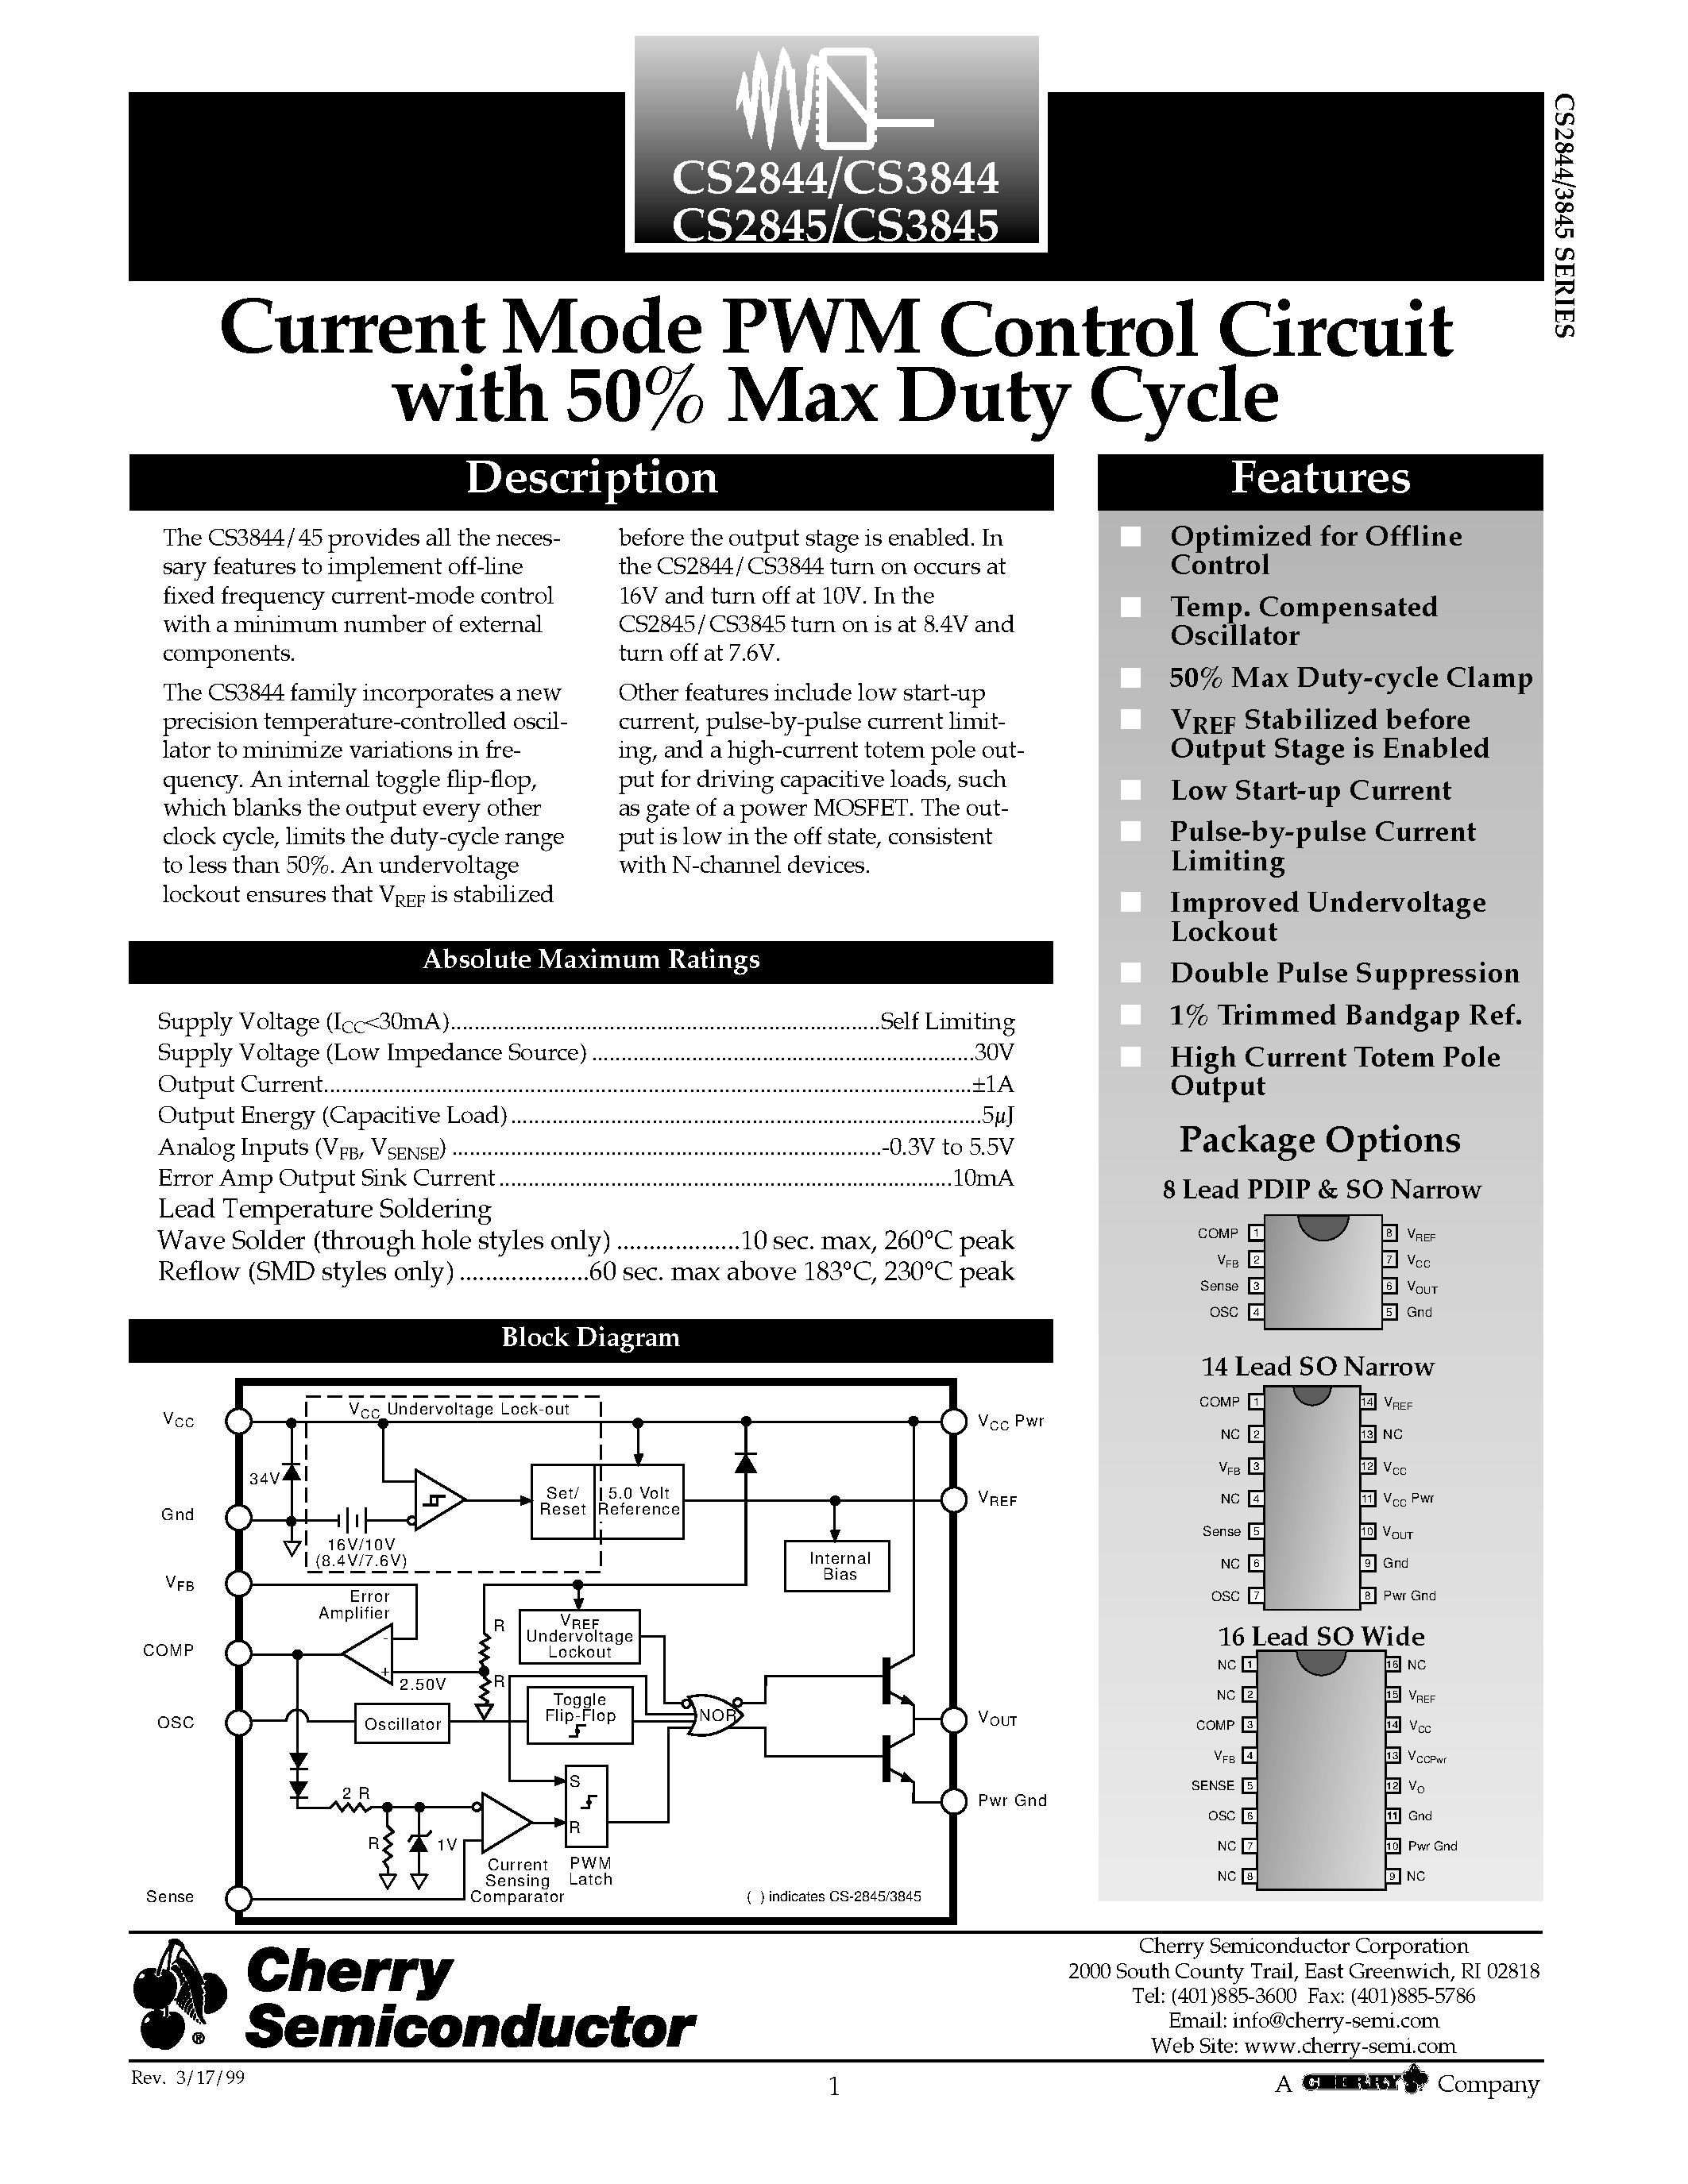 Даташит CS2844 - Current Mode PWM Control Circuit with 50% Max Duty Cycle страница 1